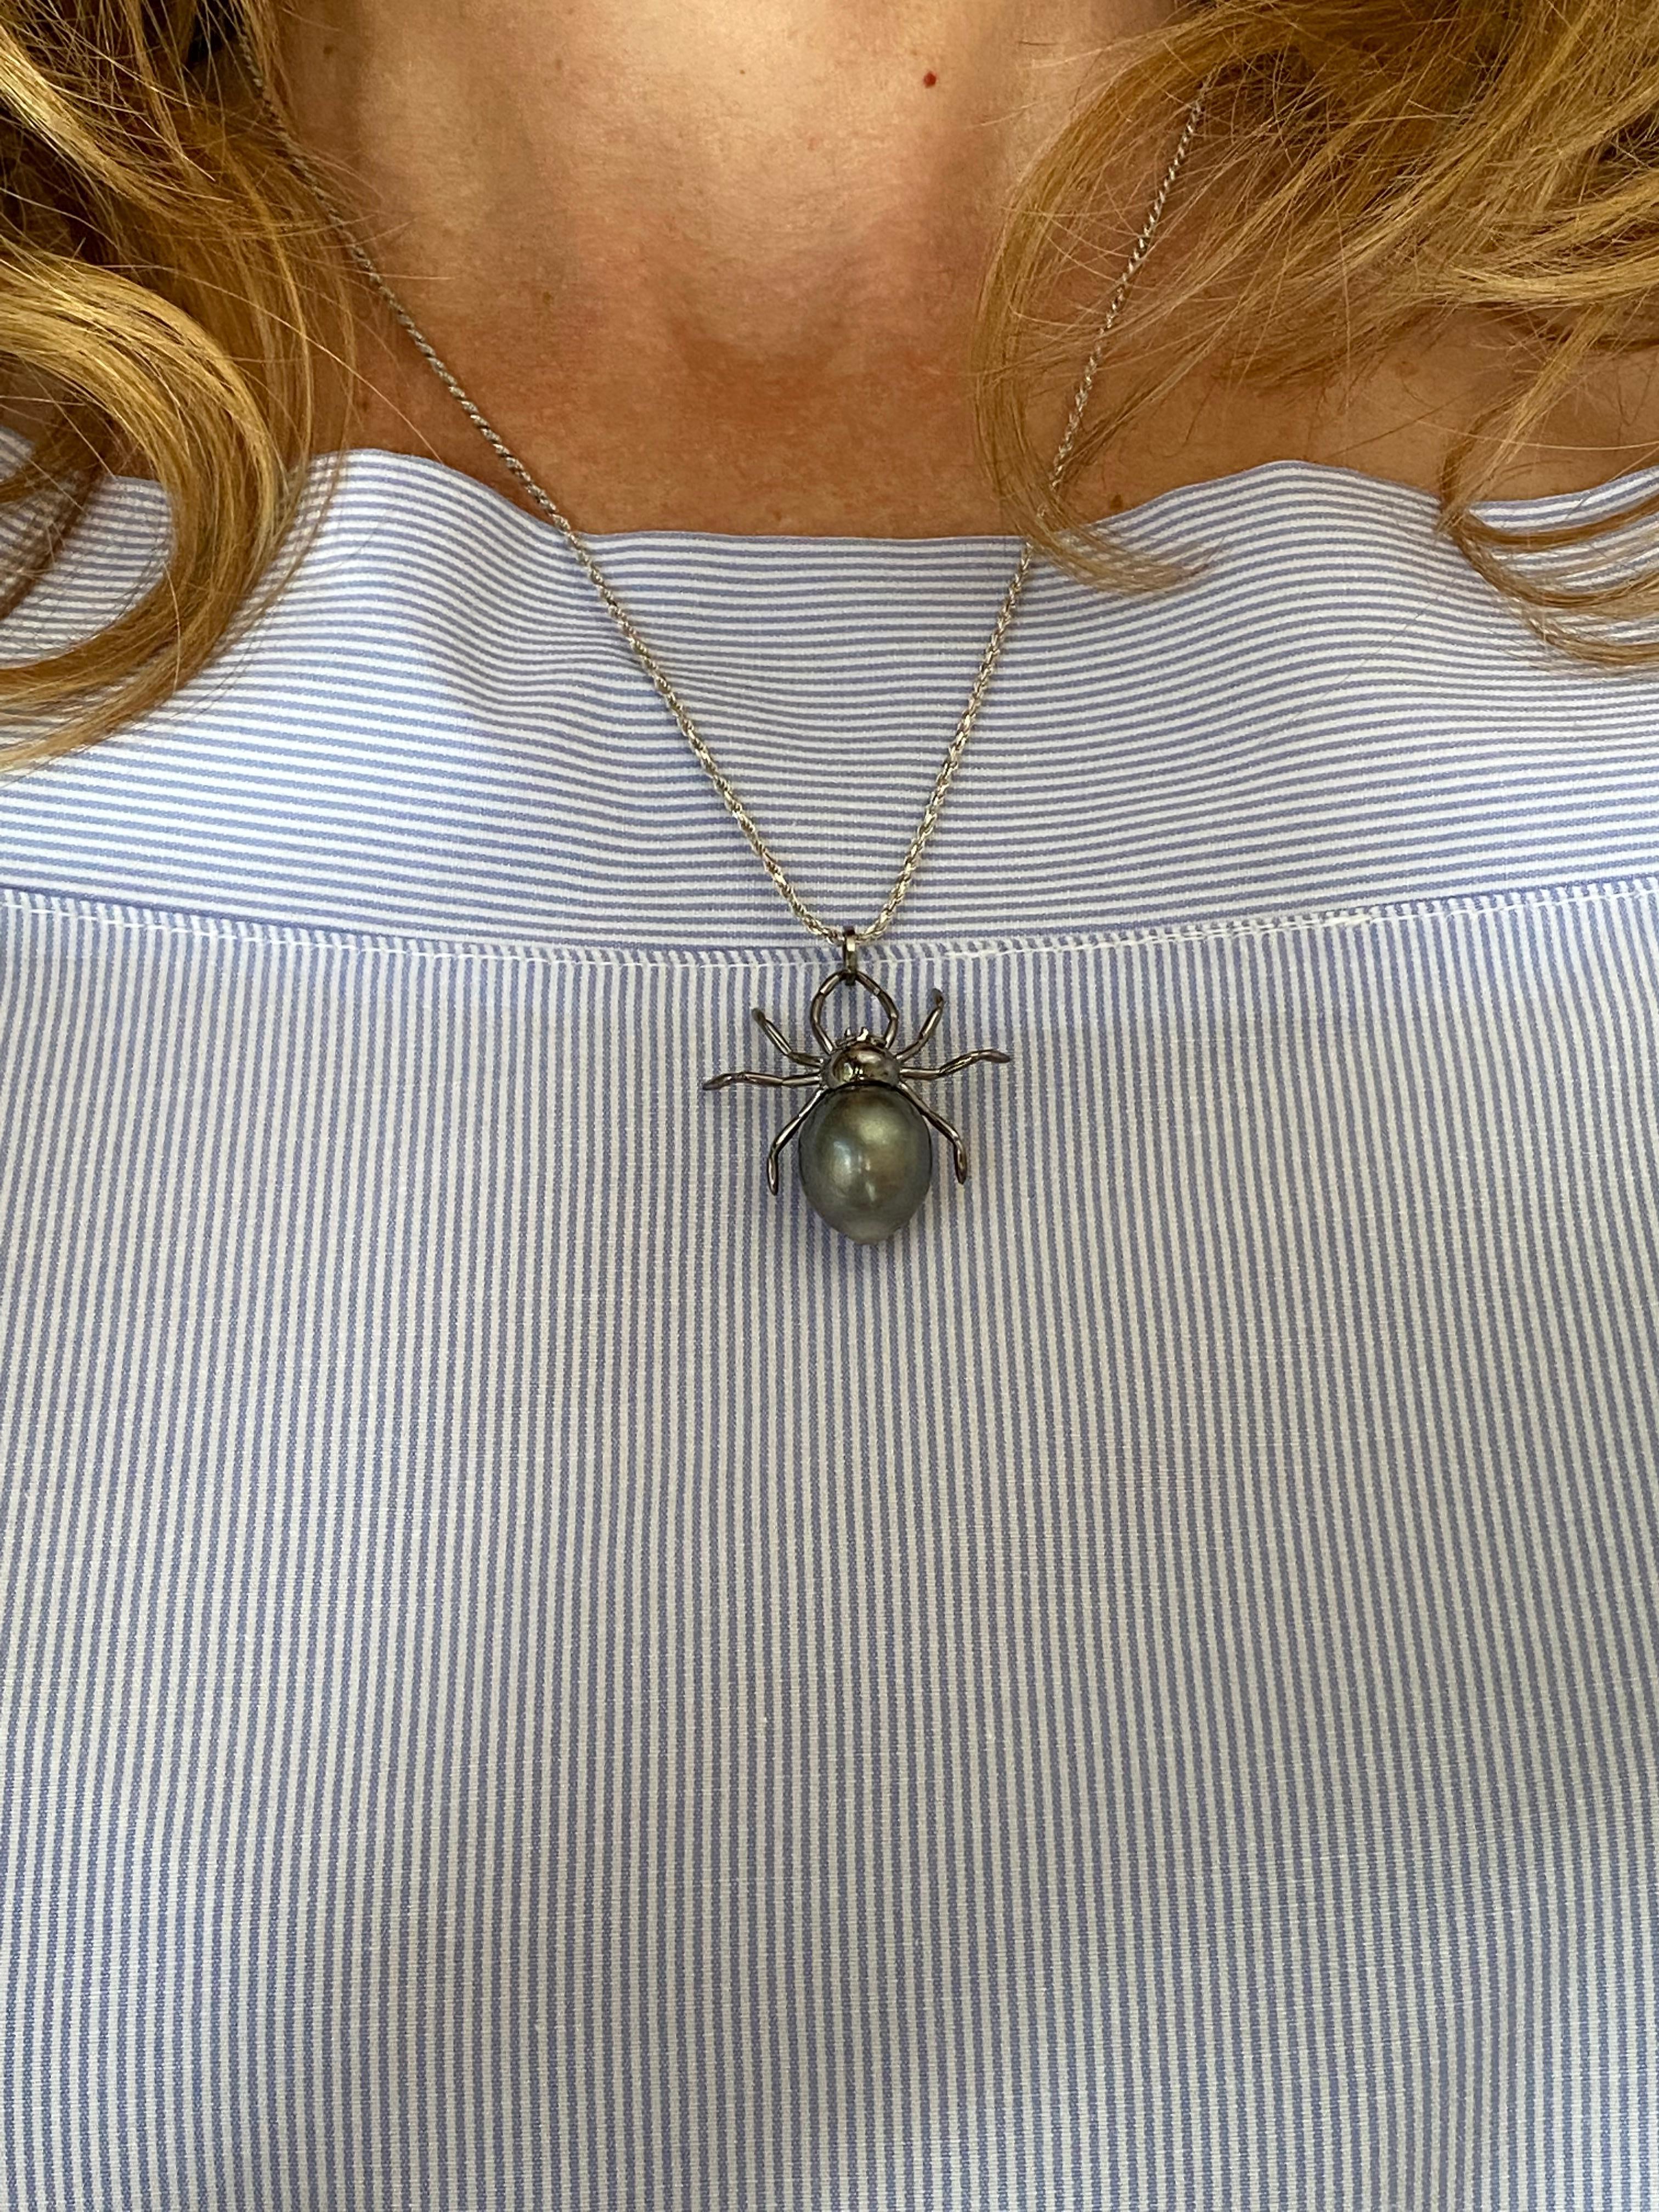 Spider Emerald South Sea Pearl Gold 18 Karat Pendant or Necklace For Sale 2